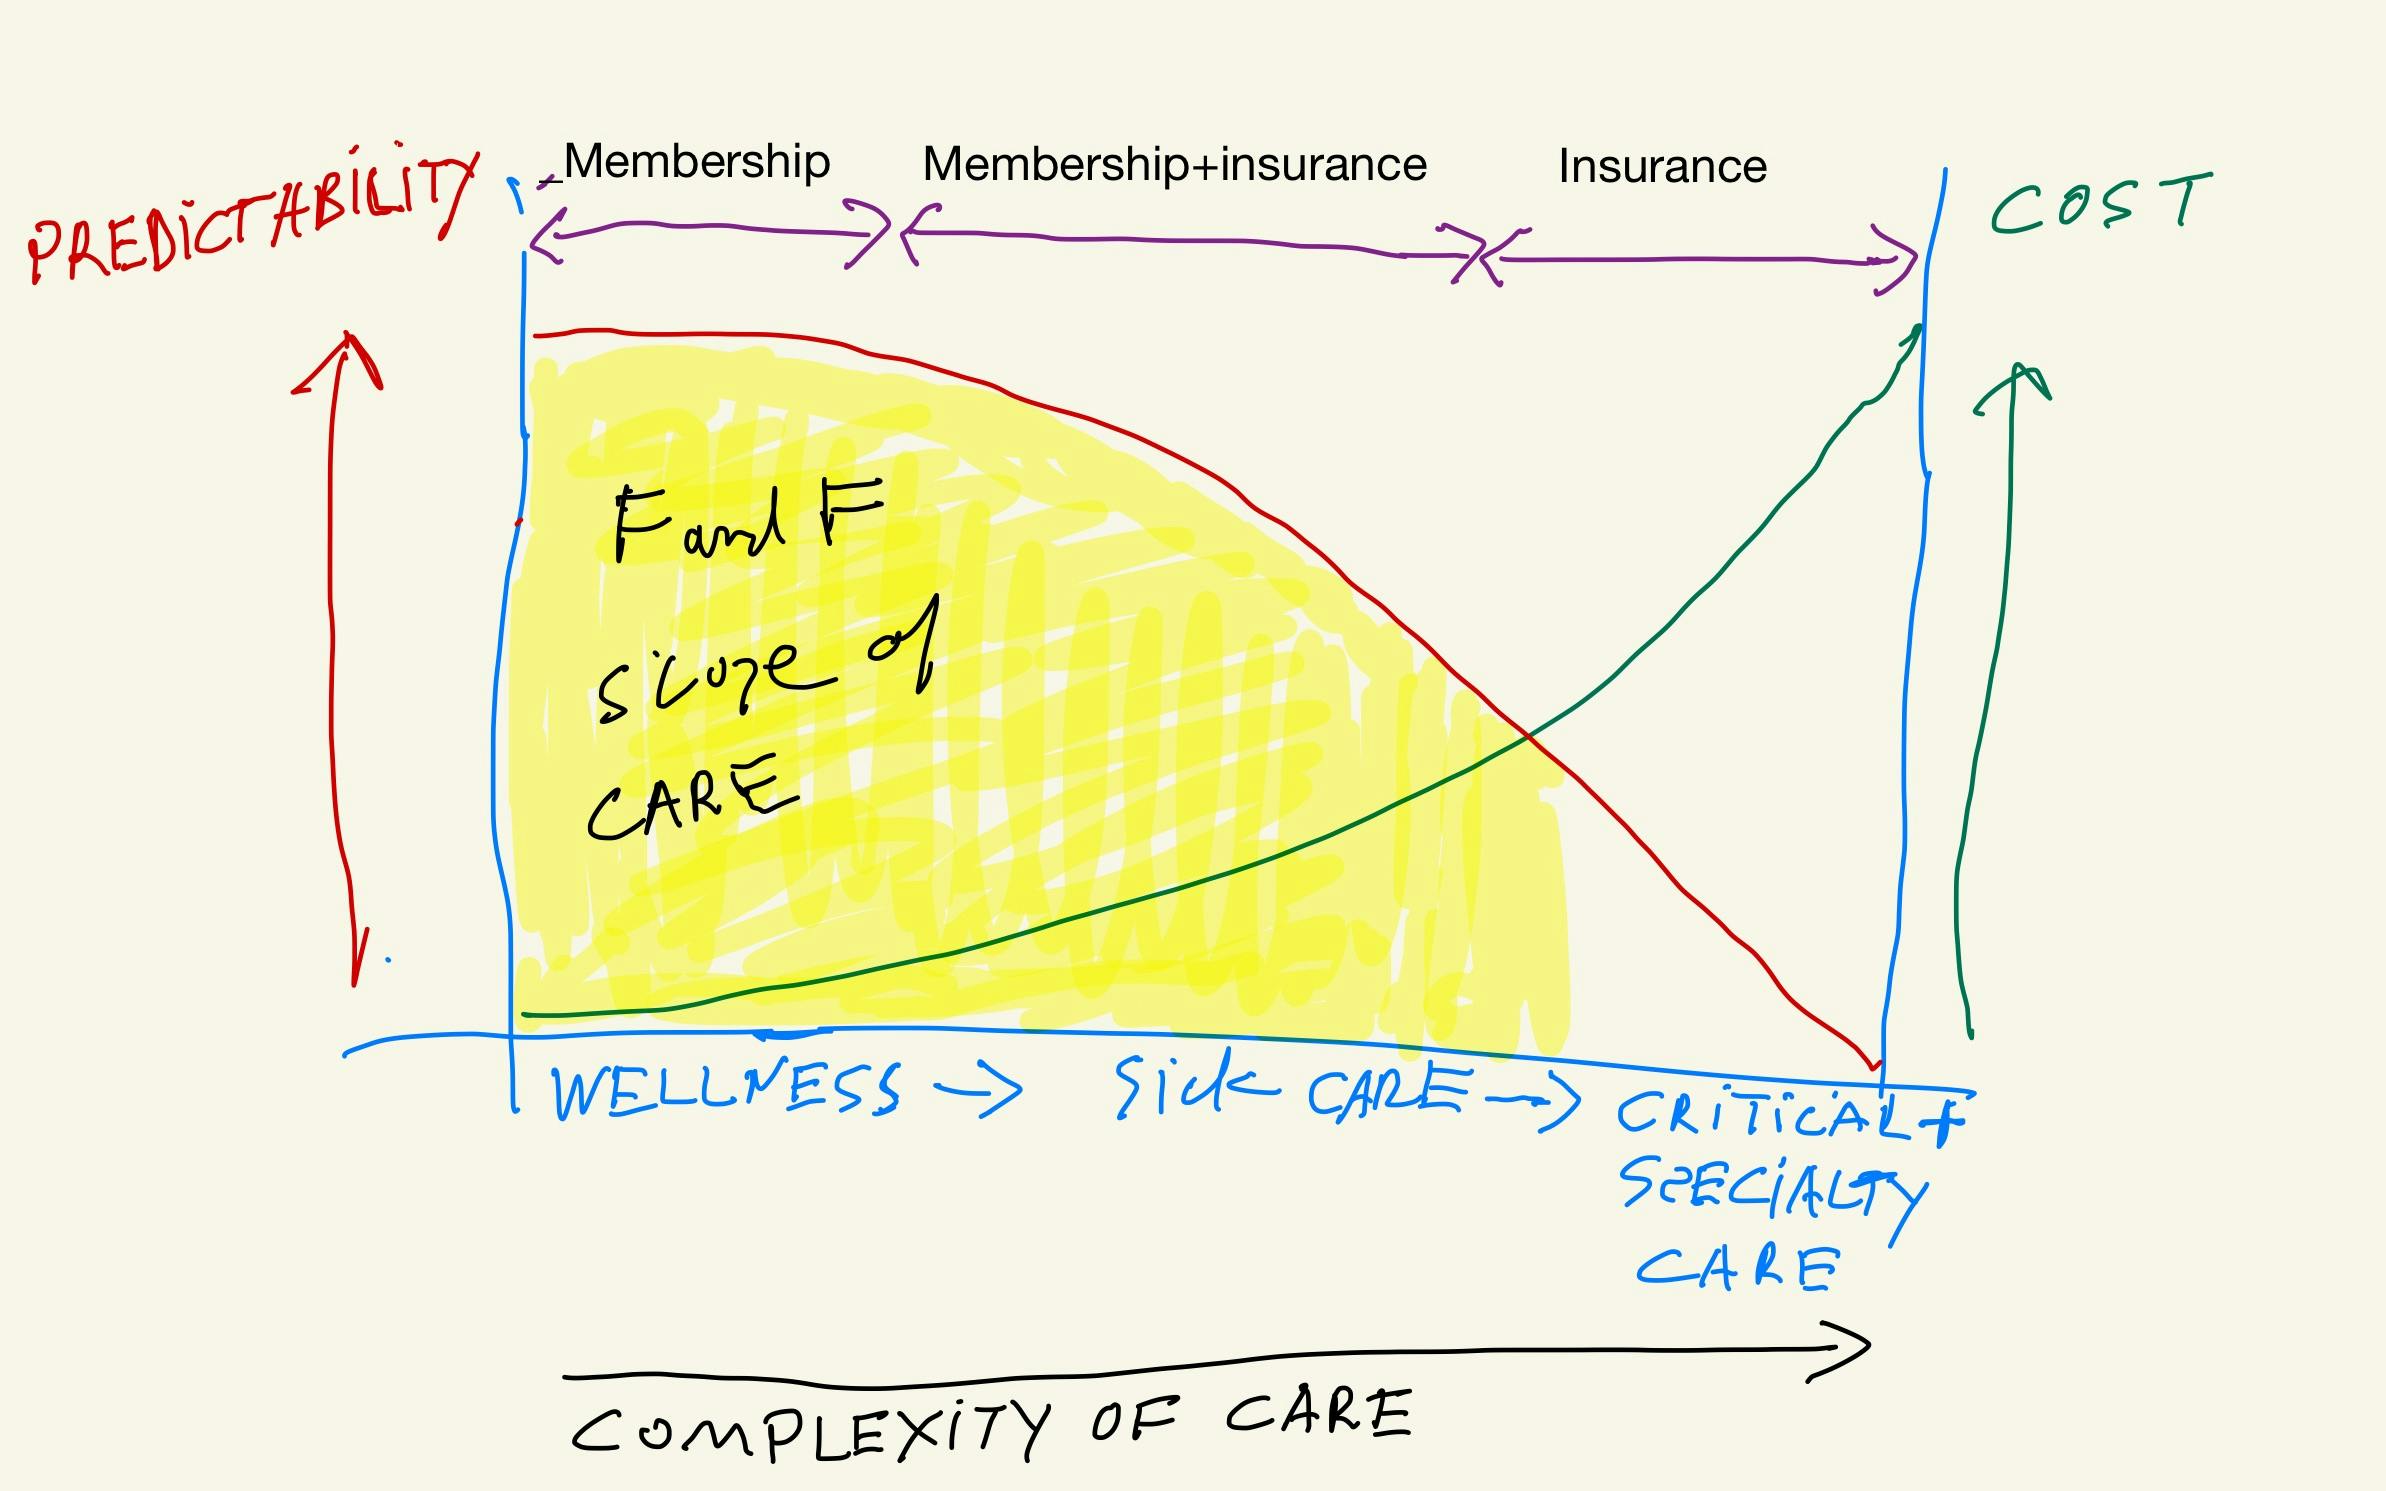 A digitally hand-drawn diagram indicating that Felix&Fido's scope of care will emphasize the membership model which allows for predictability when covering general wellness and sick care.